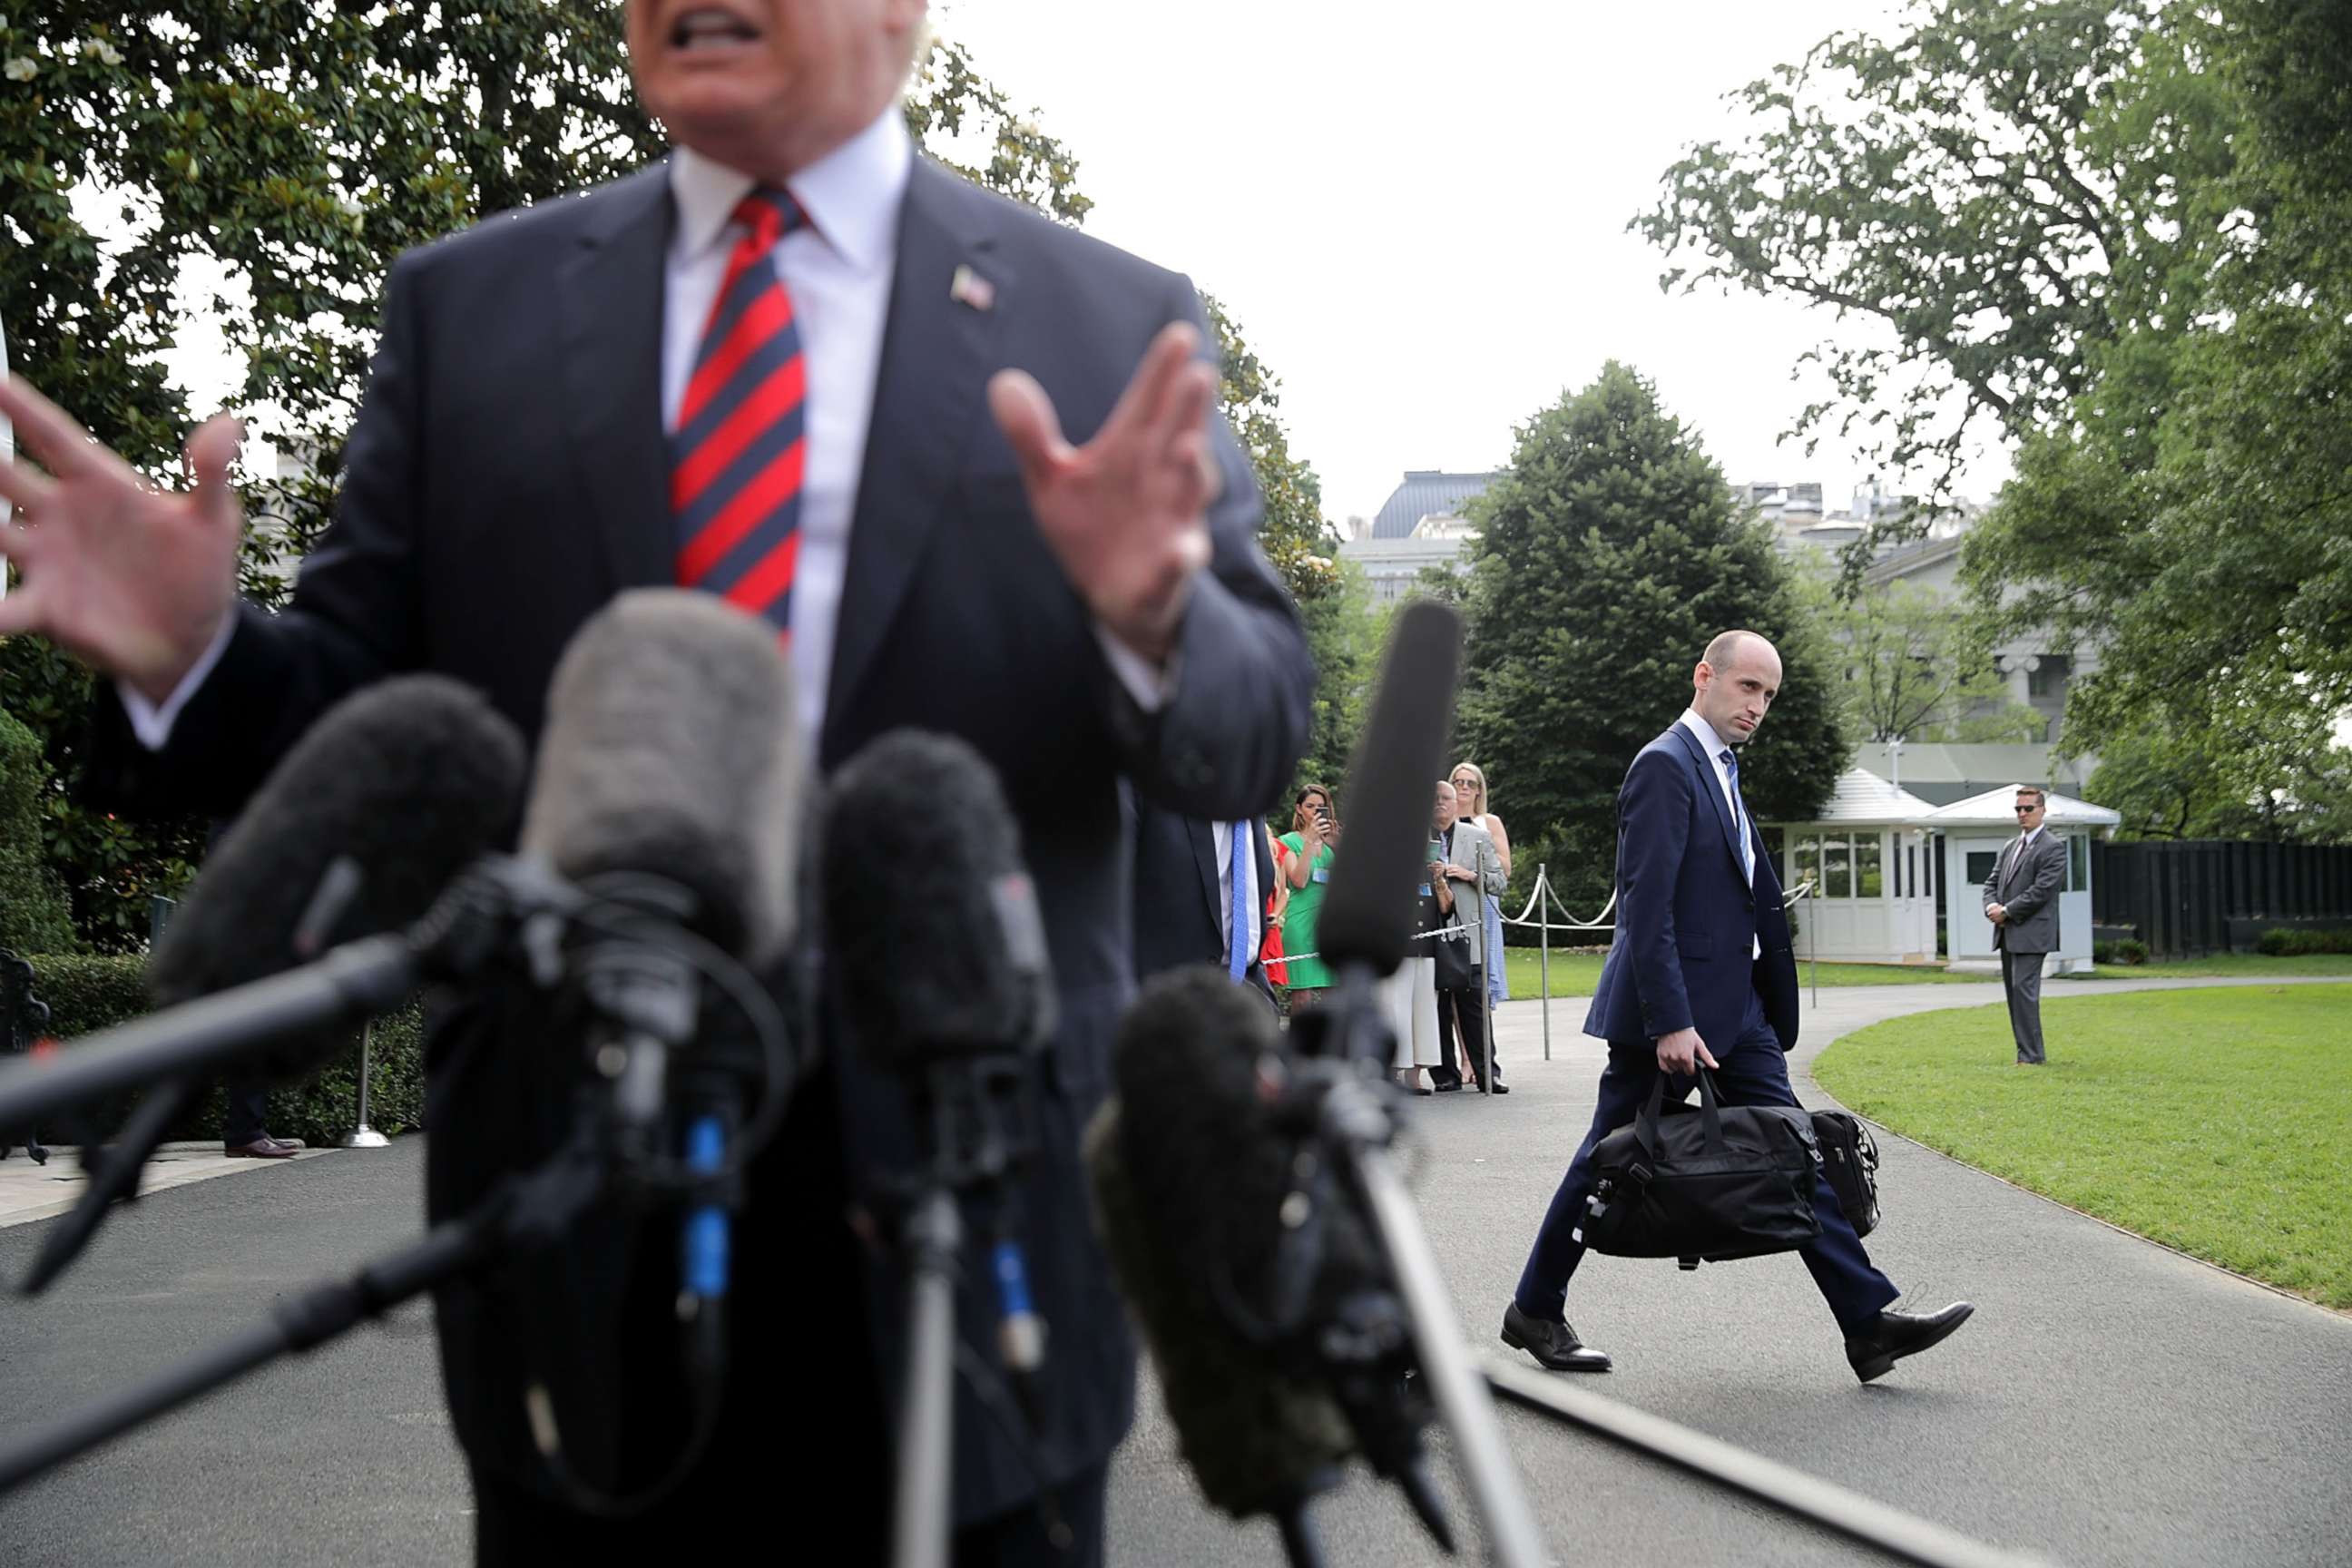 PHOTO: Senior Advisor to the President Stephen Miller walks behind President Donald Trump as he talks to reporters before they depart the White House, June 8, 2018 in Washington.